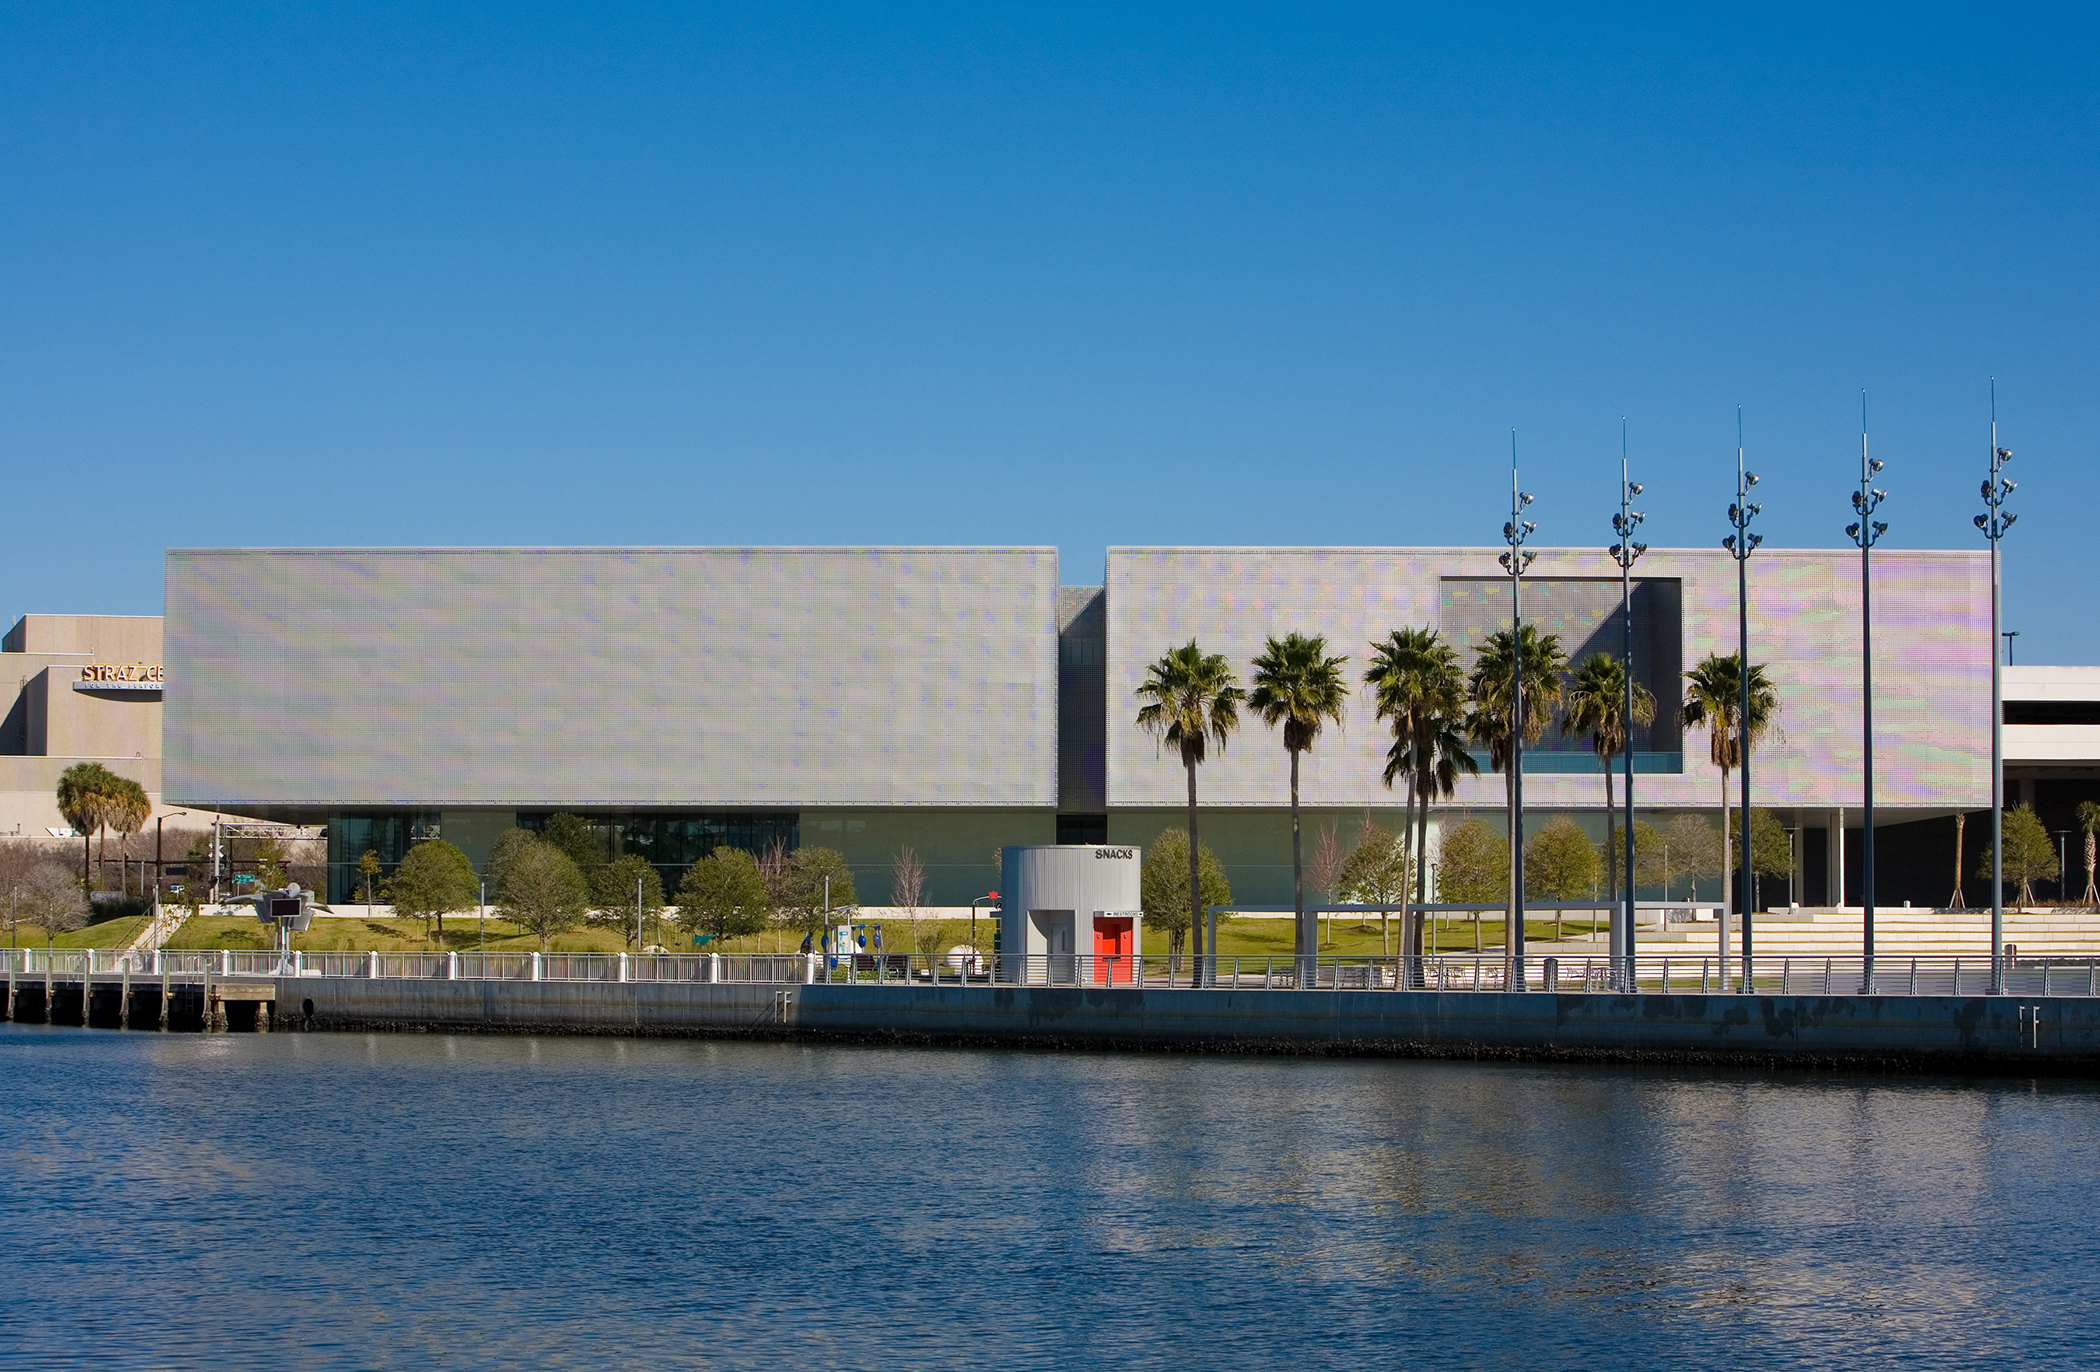 The exterior of the Tampa Art Museum is viewed on February 14, 2011 in Tampa, Florida.